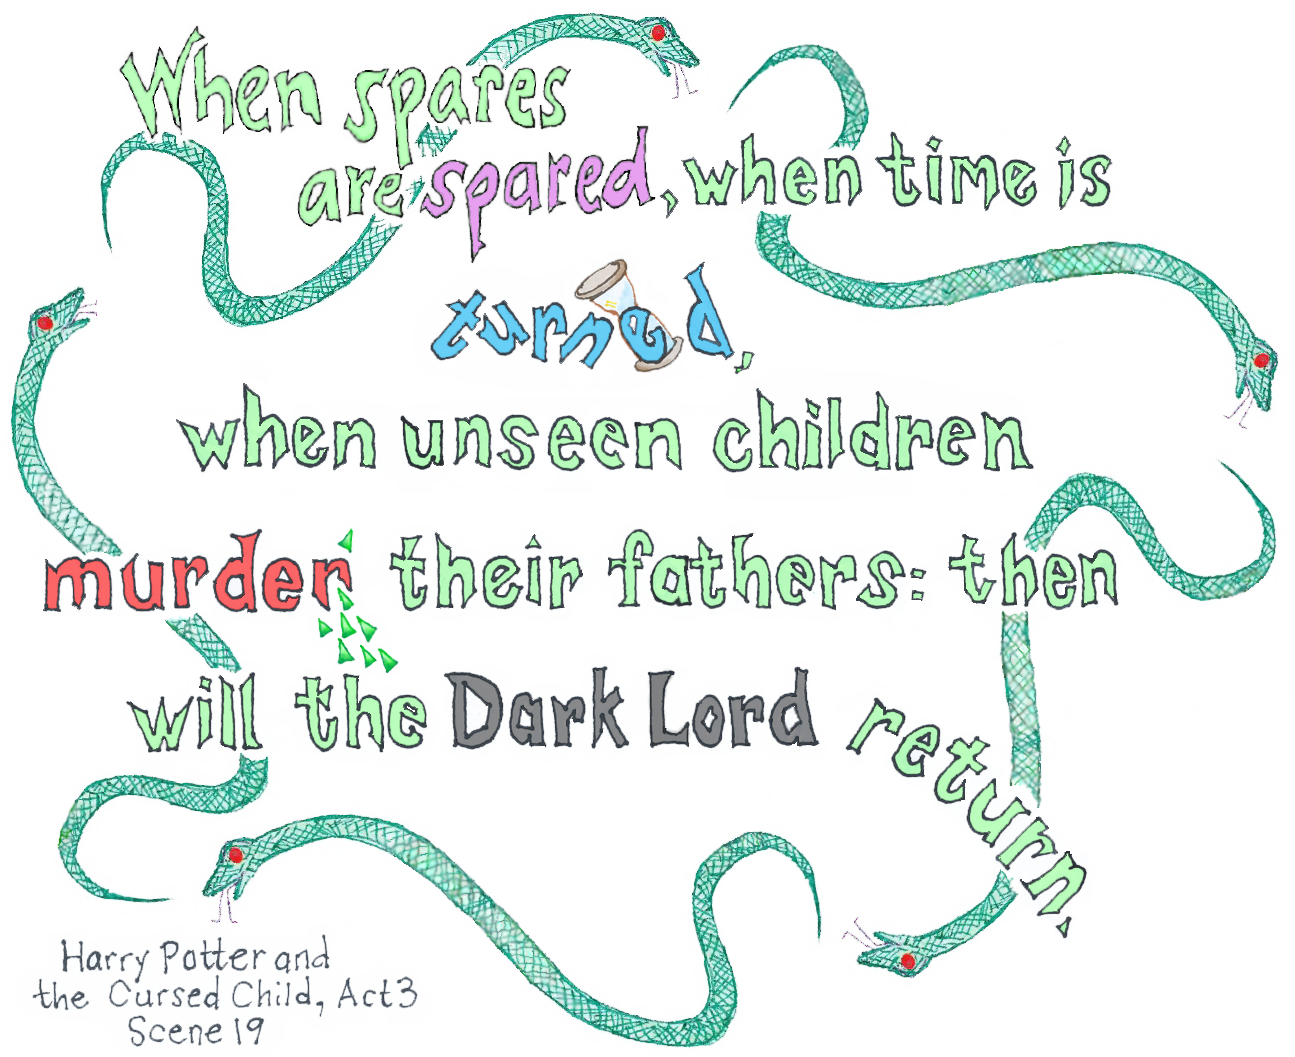 When spares are spared prophecy (Cursed Child)